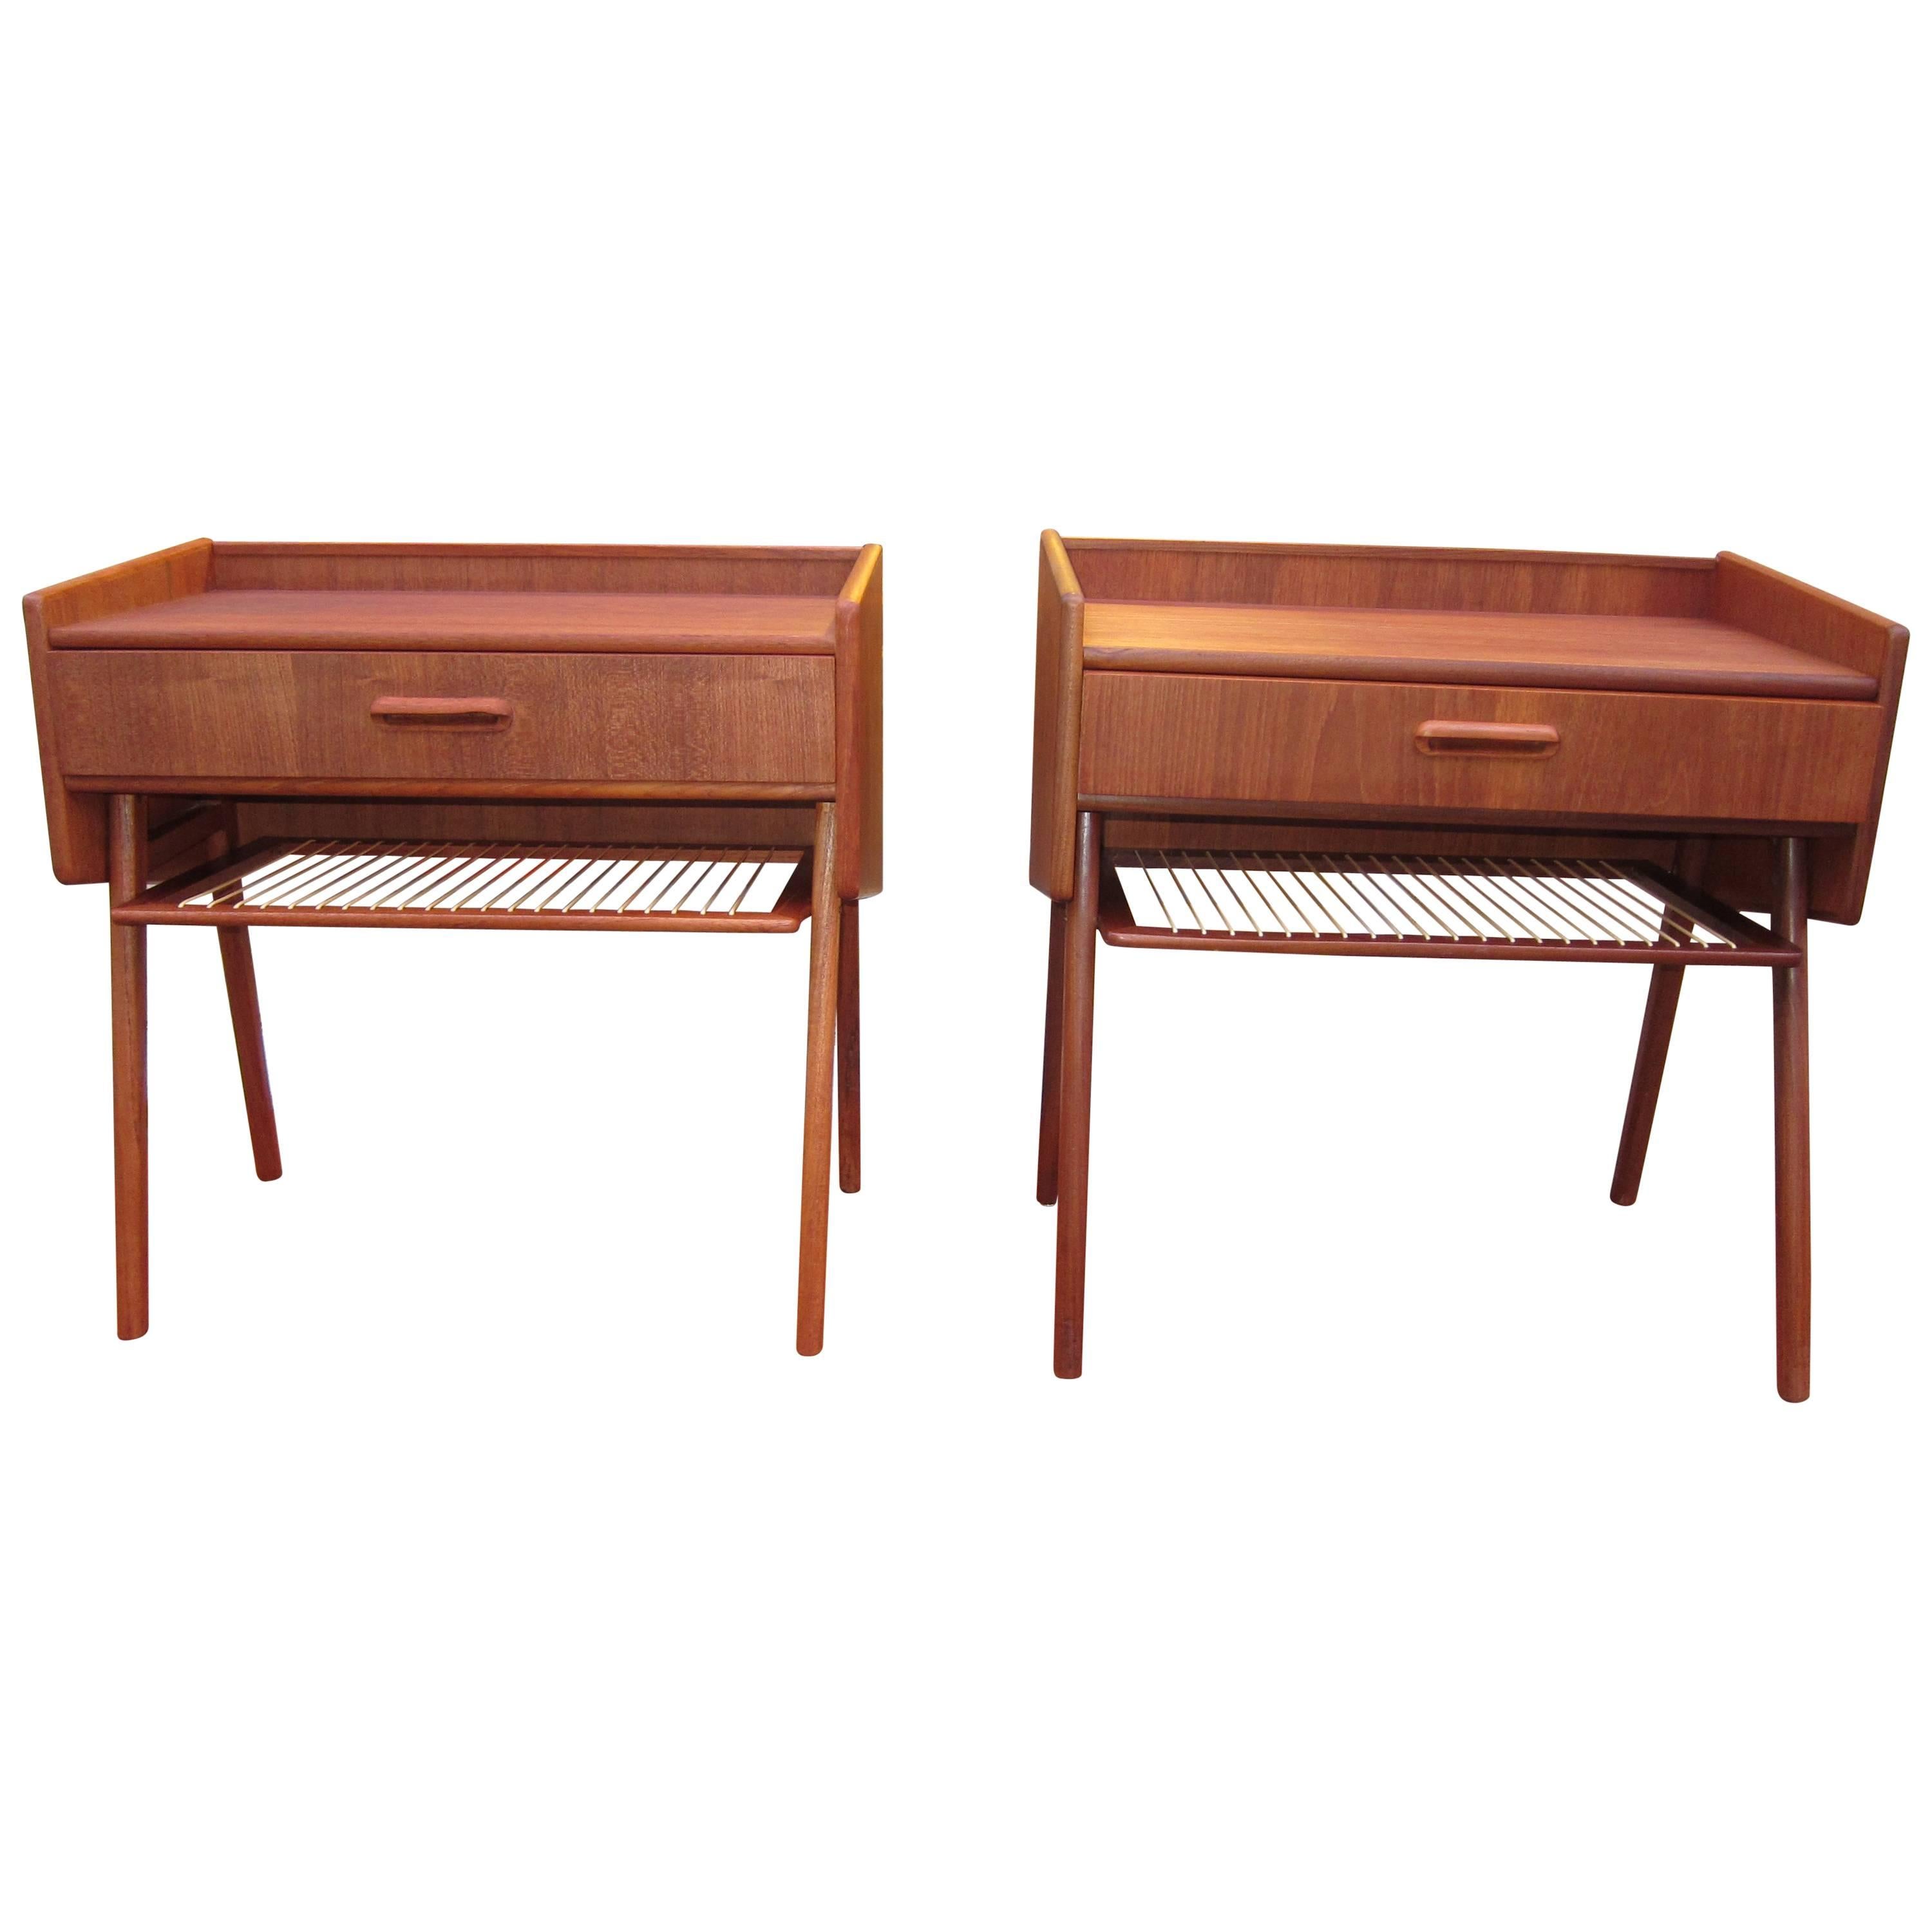 Pair of Danish Mid-Century Modern Night Tables with Cane Shelf For Sale